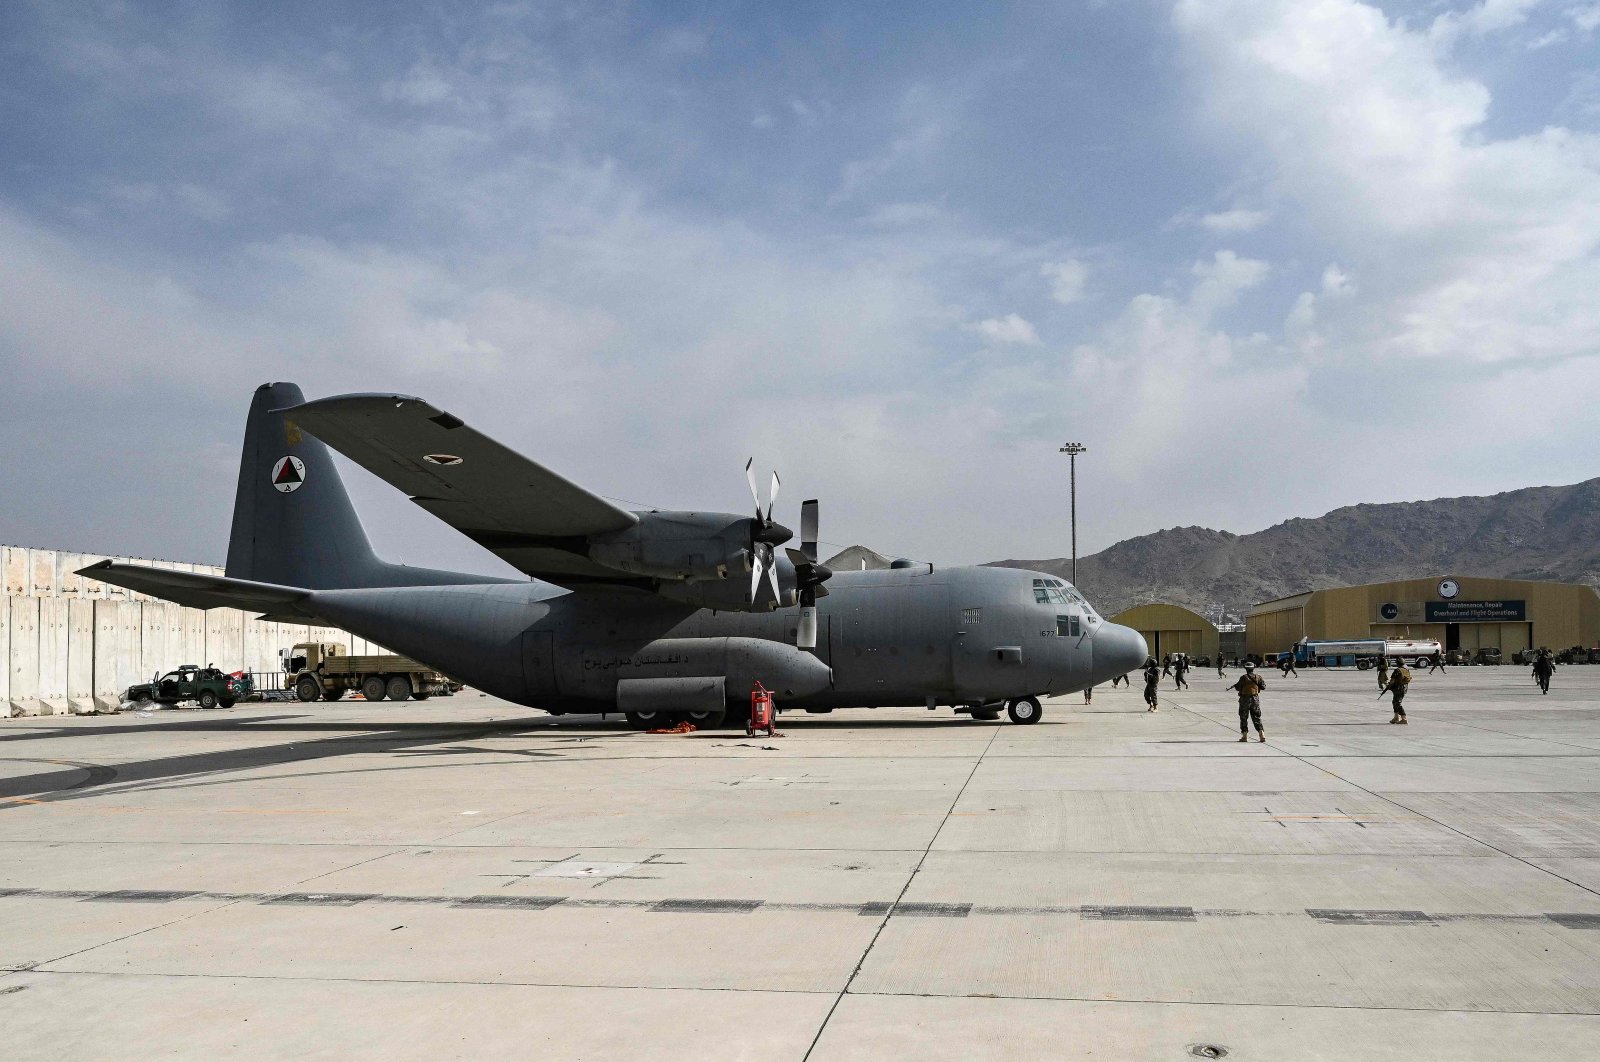 Taliban Badri special force fighters stand guard next to an Afghan Air Force aircraft at the airport in Kabul, Afghanistan, Aug. 31, 2021, after the U.S. pulled all its troops out of the country to end a brutal 20-year war. (AFP Photo)